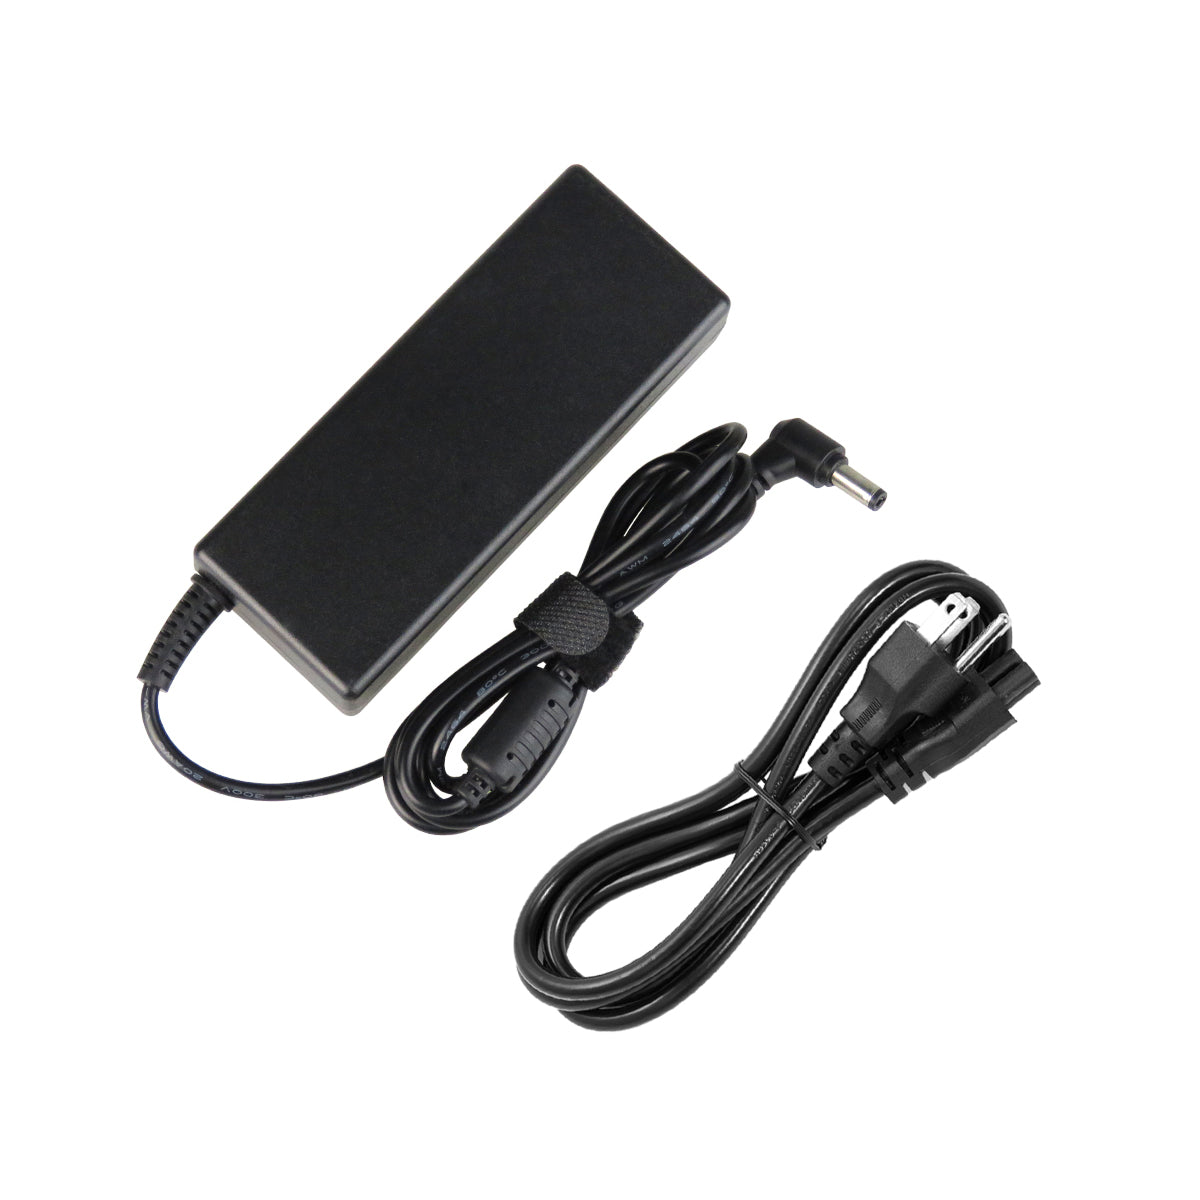 AC Adapter Charger for ASUS X75v Notebook.